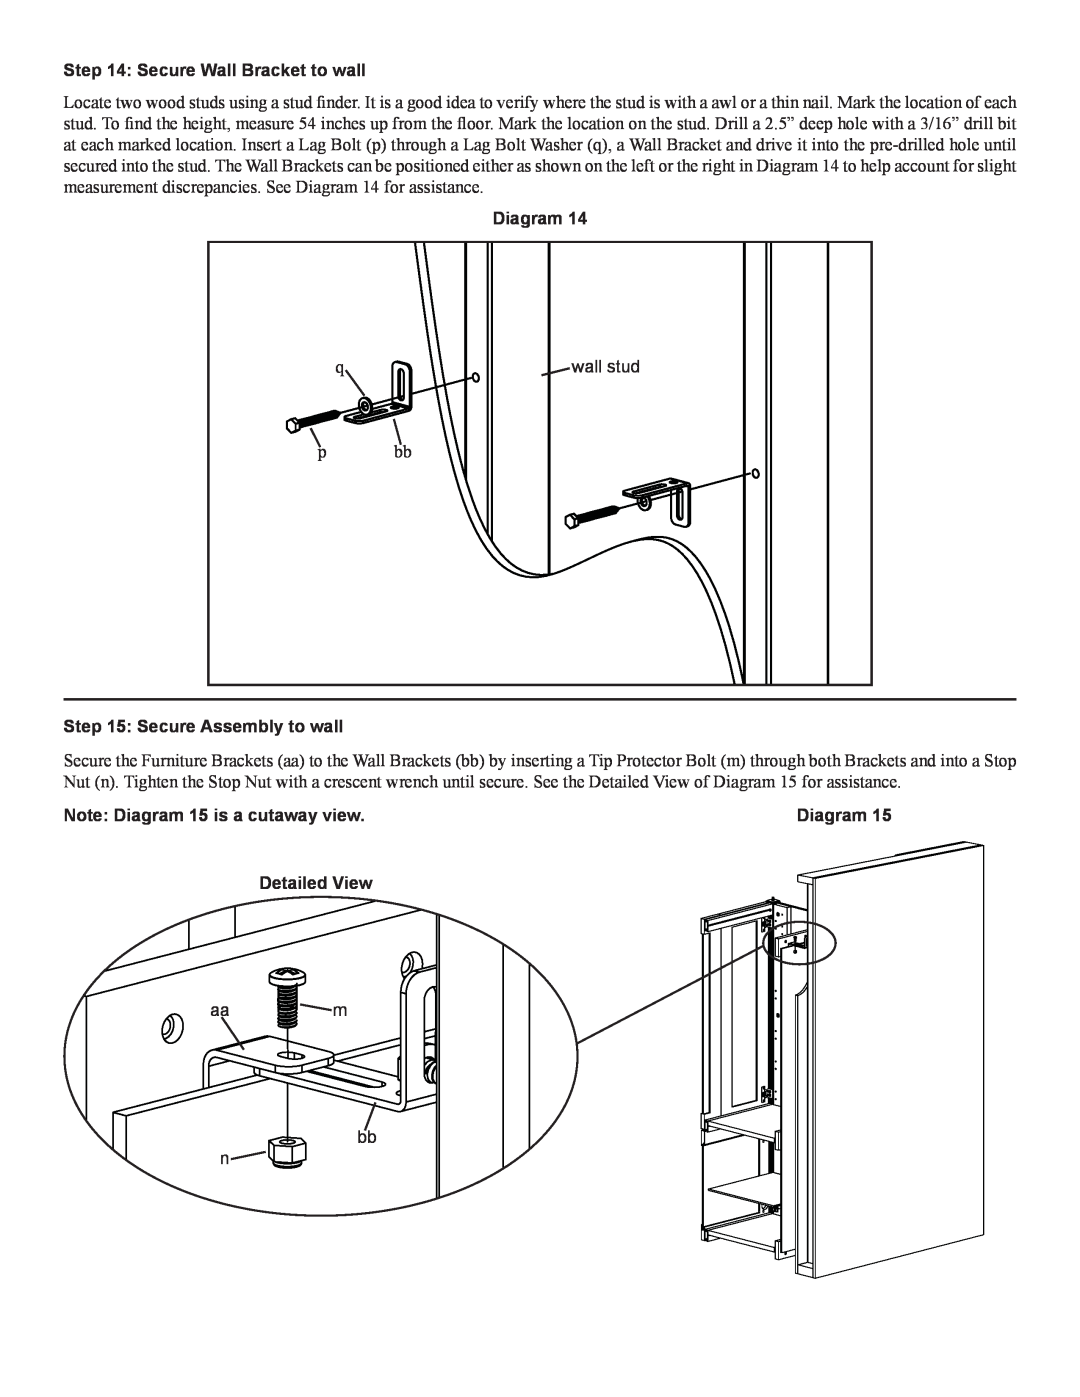 Sanus Systems CFAR47 manual Secure Wall Bracket to wall, Secure Assembly to wall, Note Diagram 15 is a cutaway view 